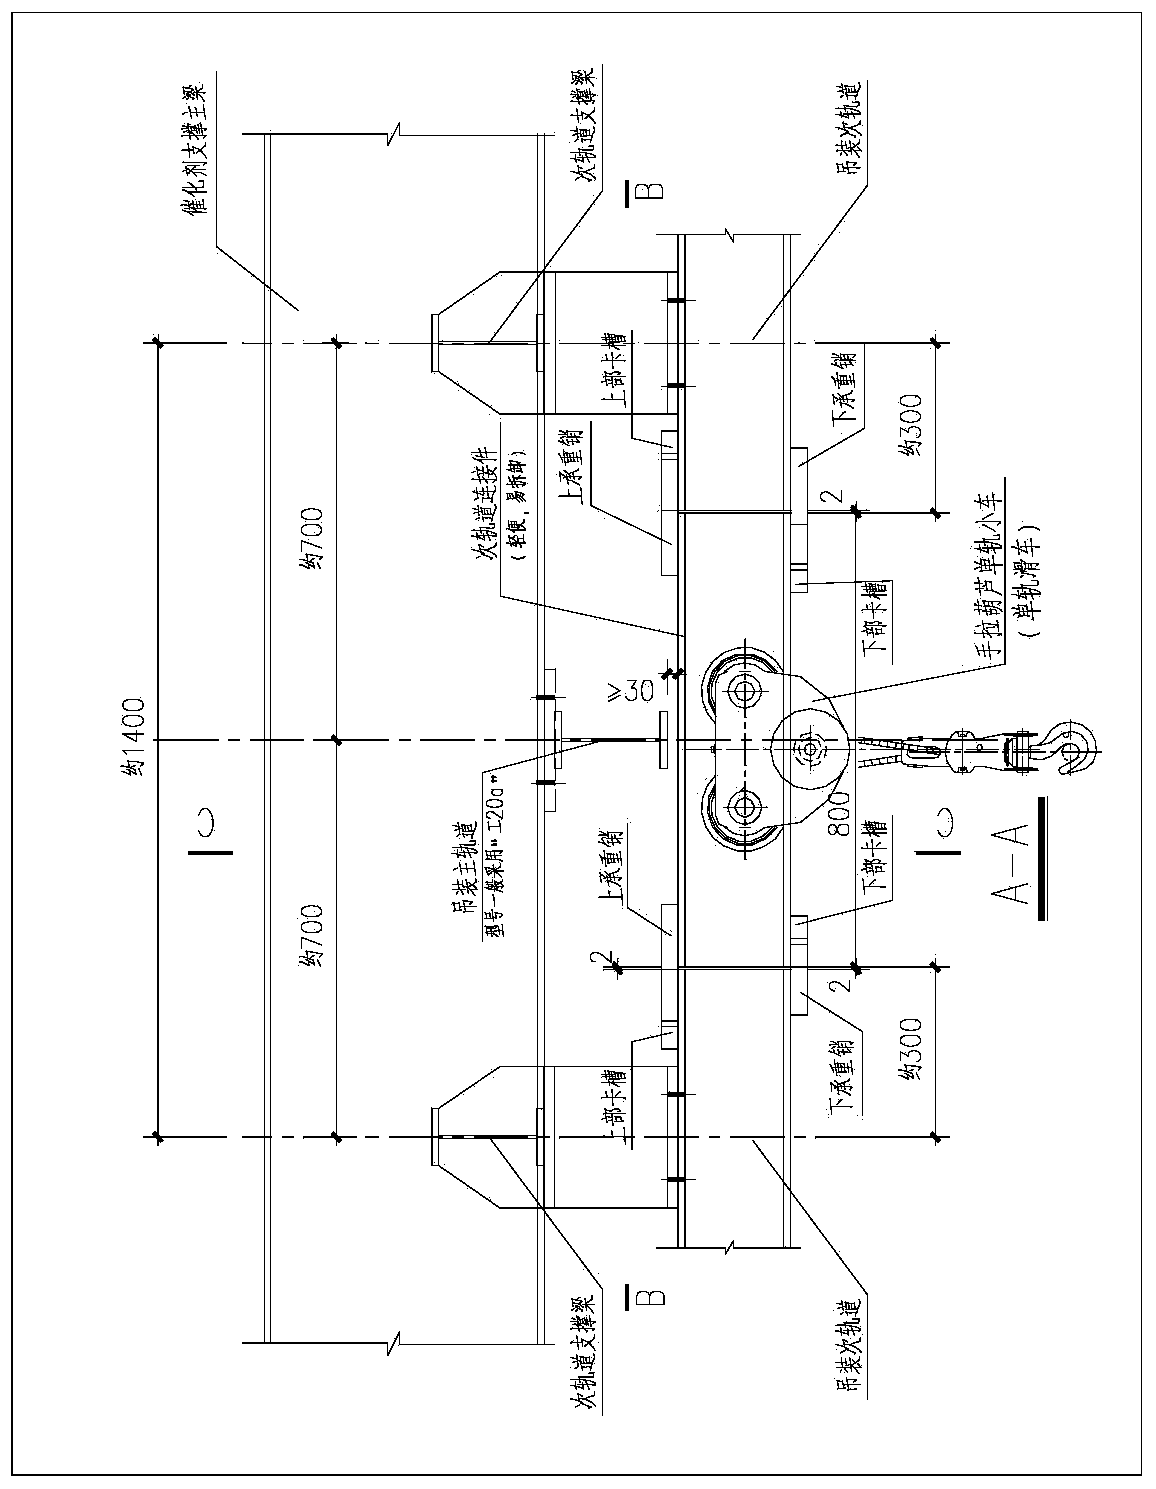 Assembly method for catalyst modules in novel SCR (Selective Catalytic Reduction) denitration reactor